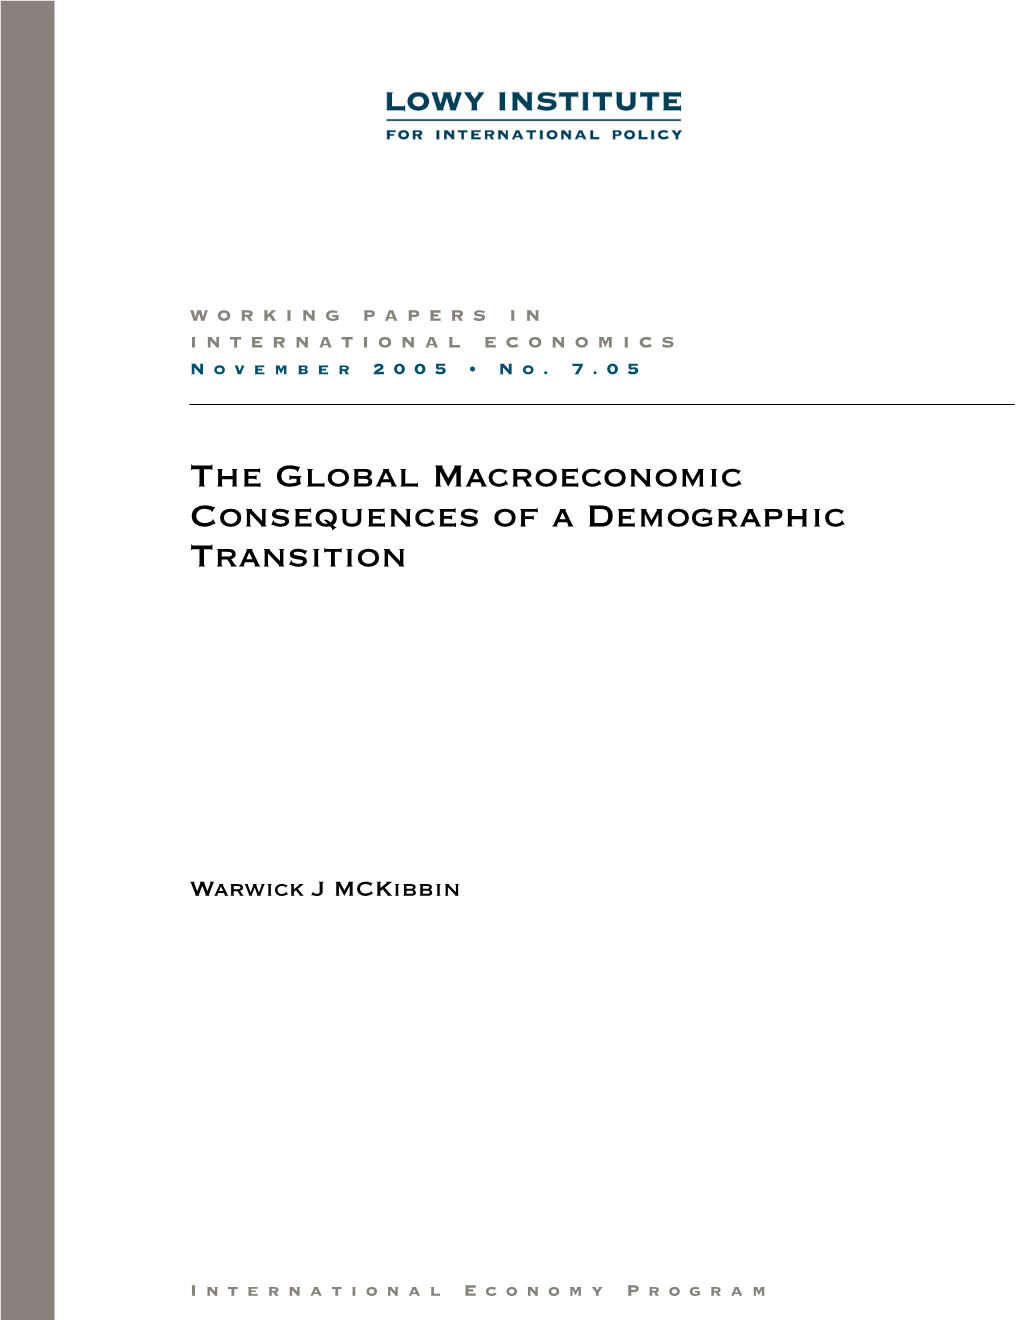 The Global Macroeconomic Consequences of a Demographic Transition